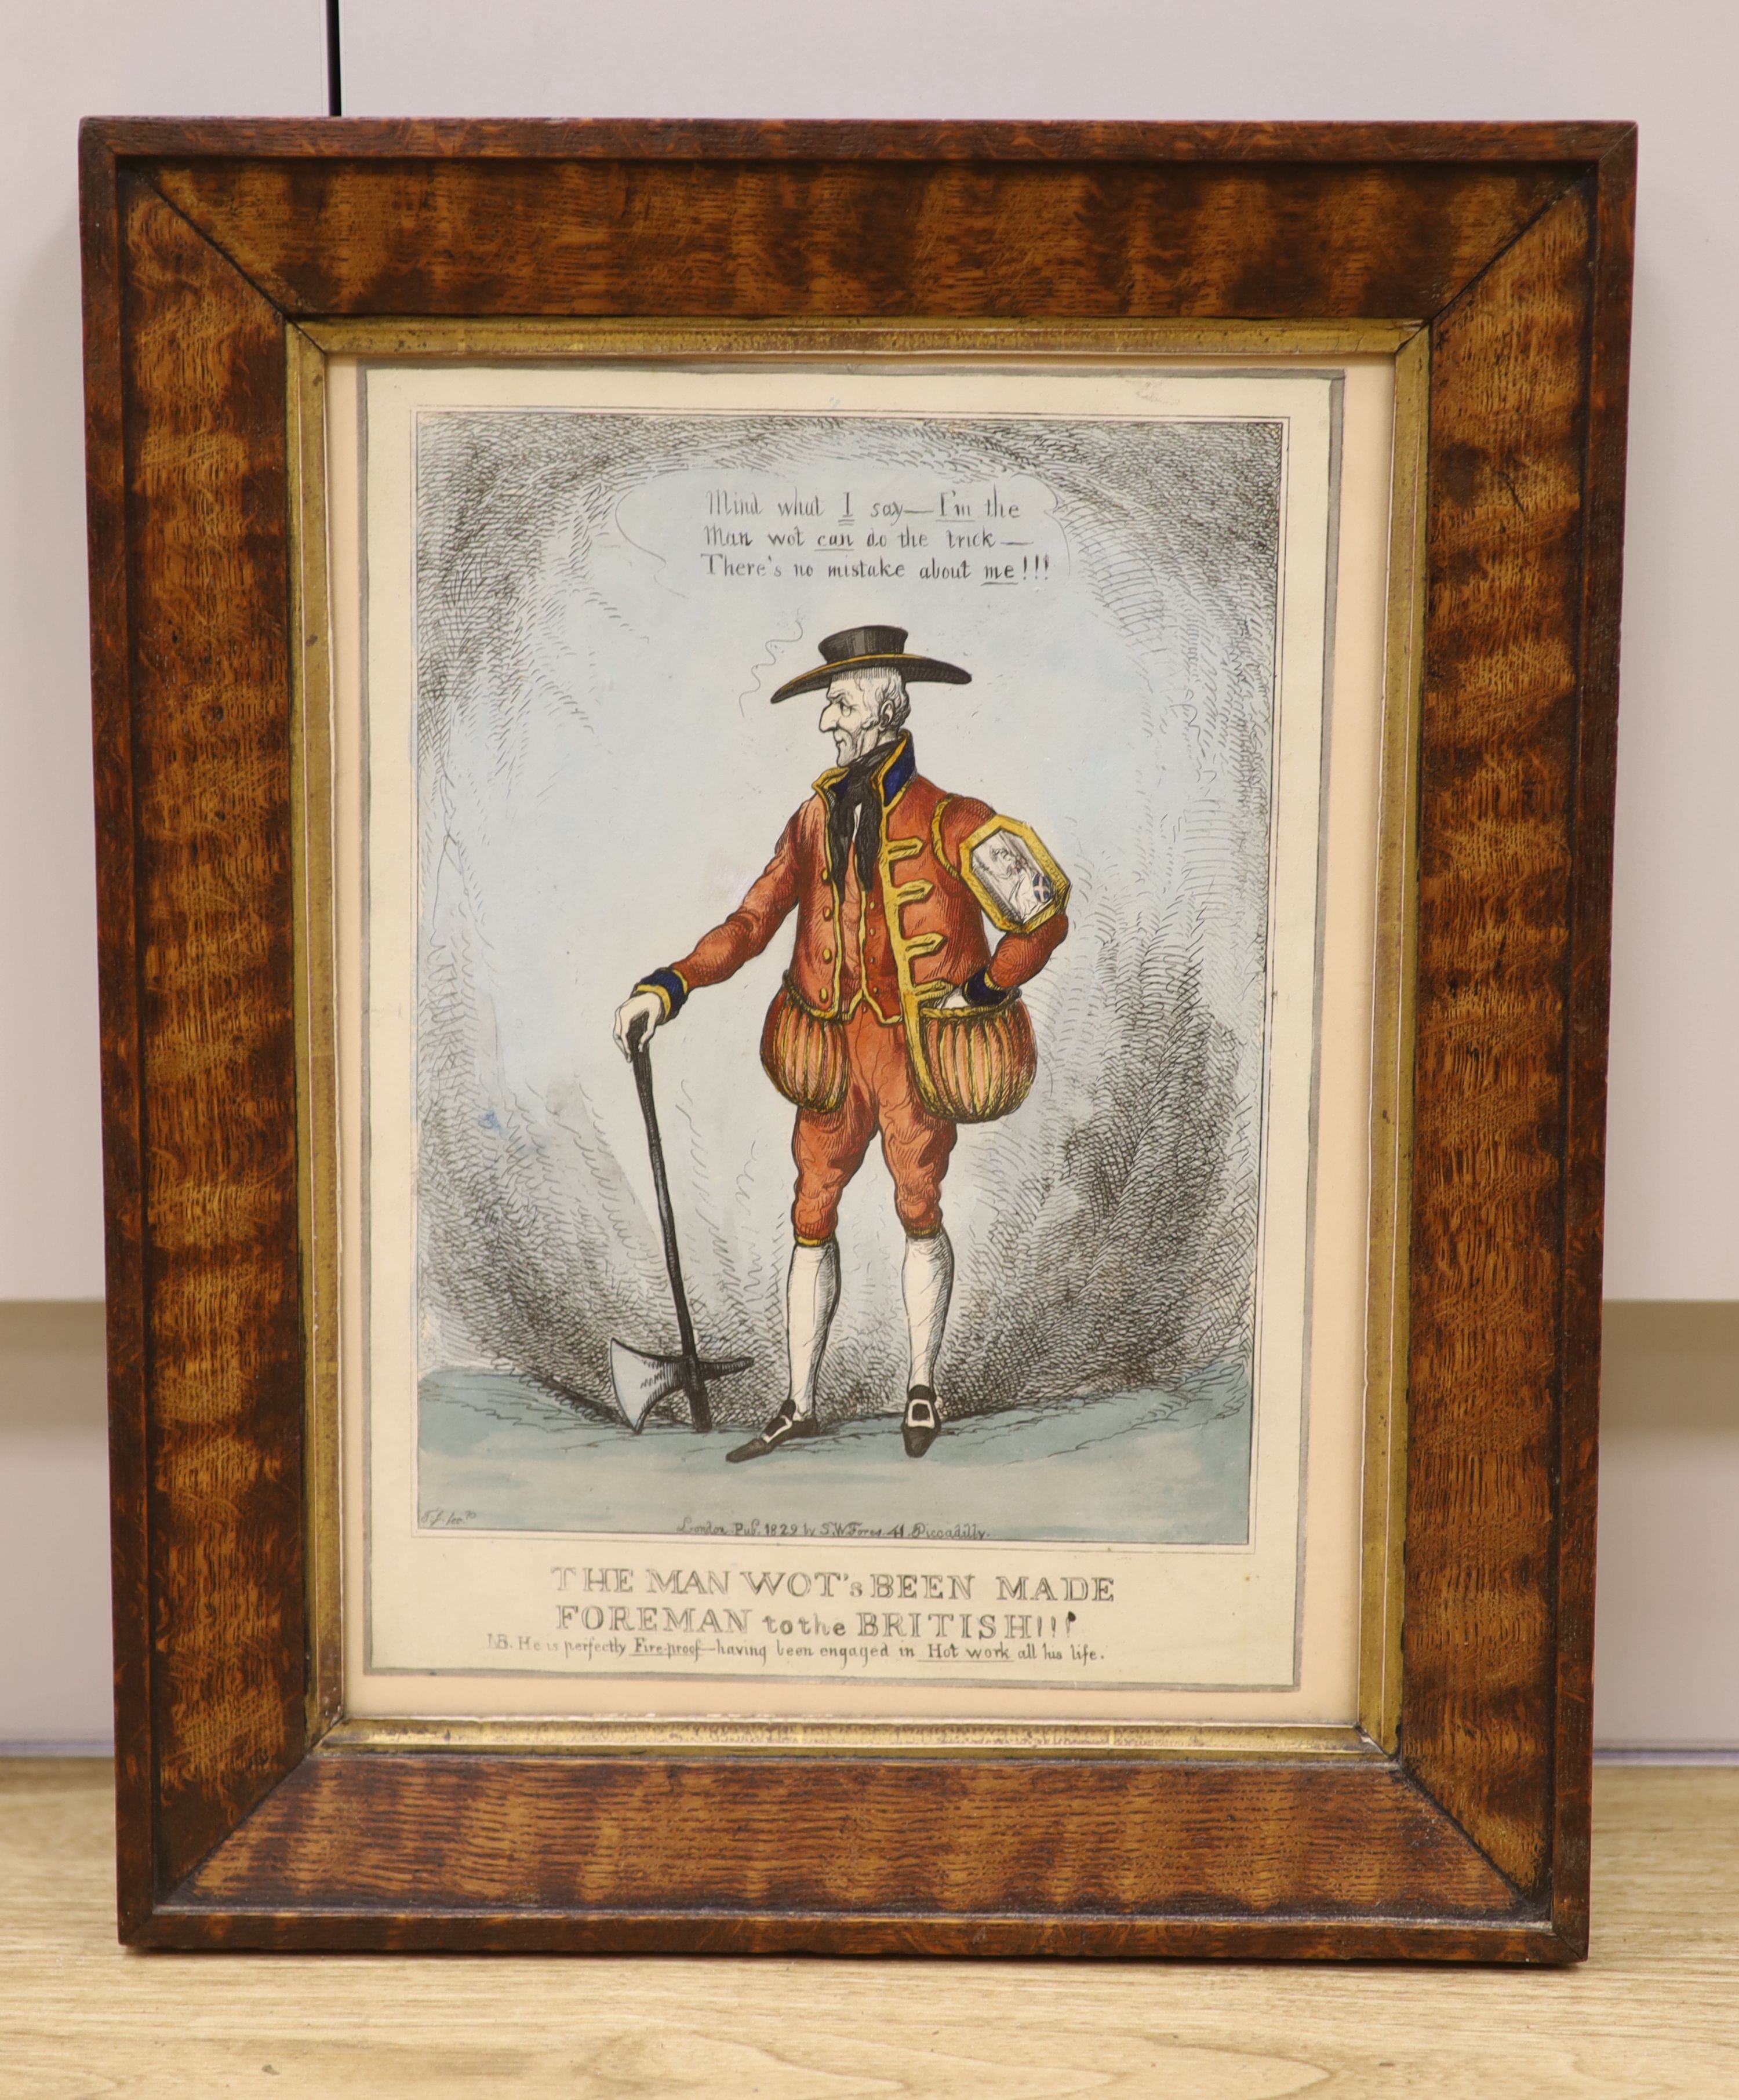 S.W. Fores publ., coloured engraving, 'The Man Wot's Been Made Foreman to the British', 34 x 24cm